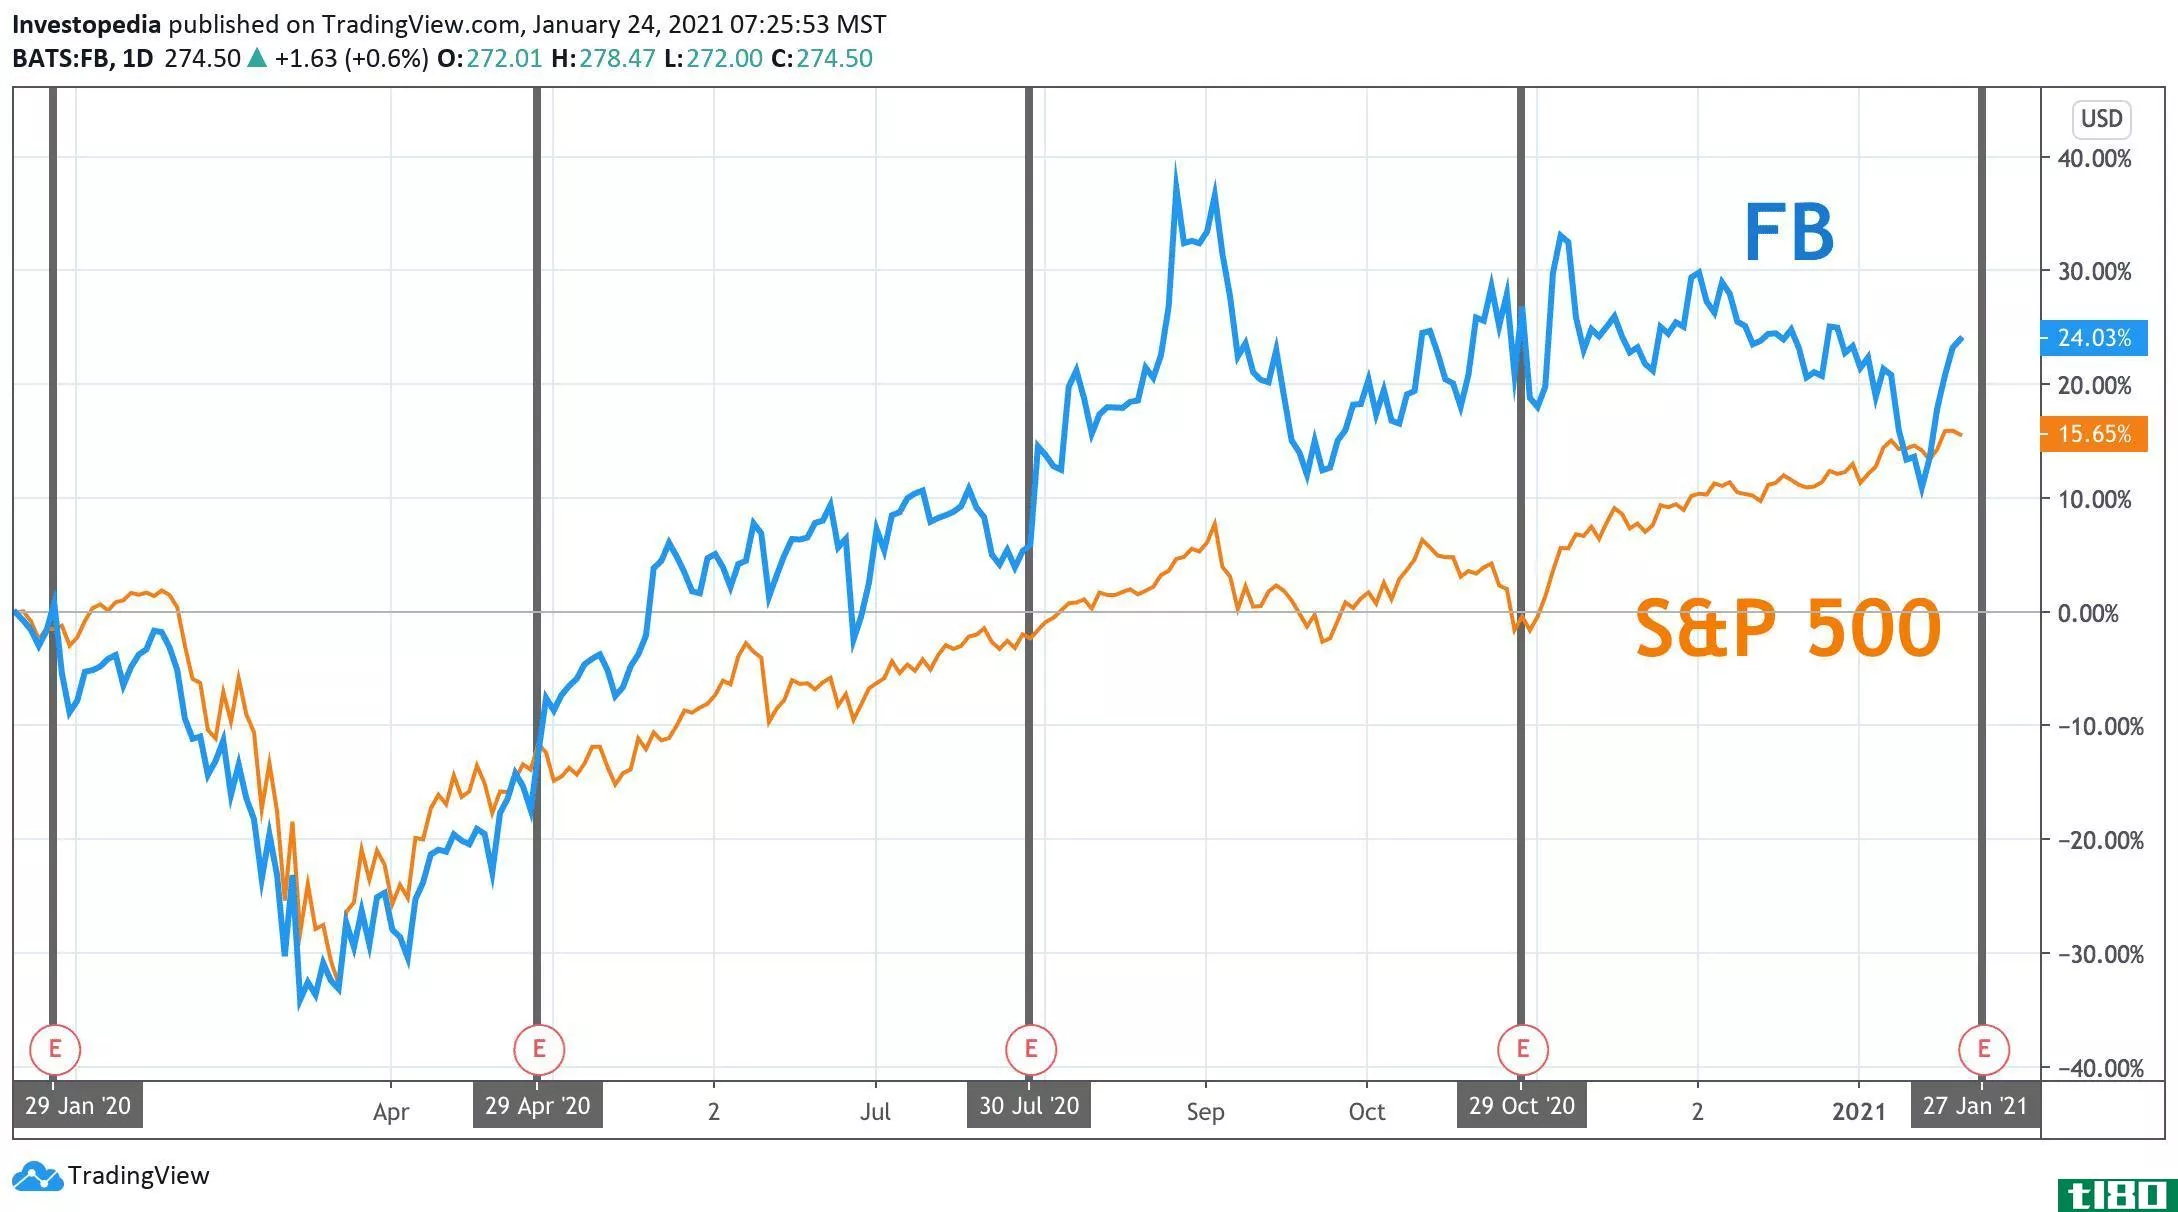 One Year Total Return for S&P 500 and Facebook